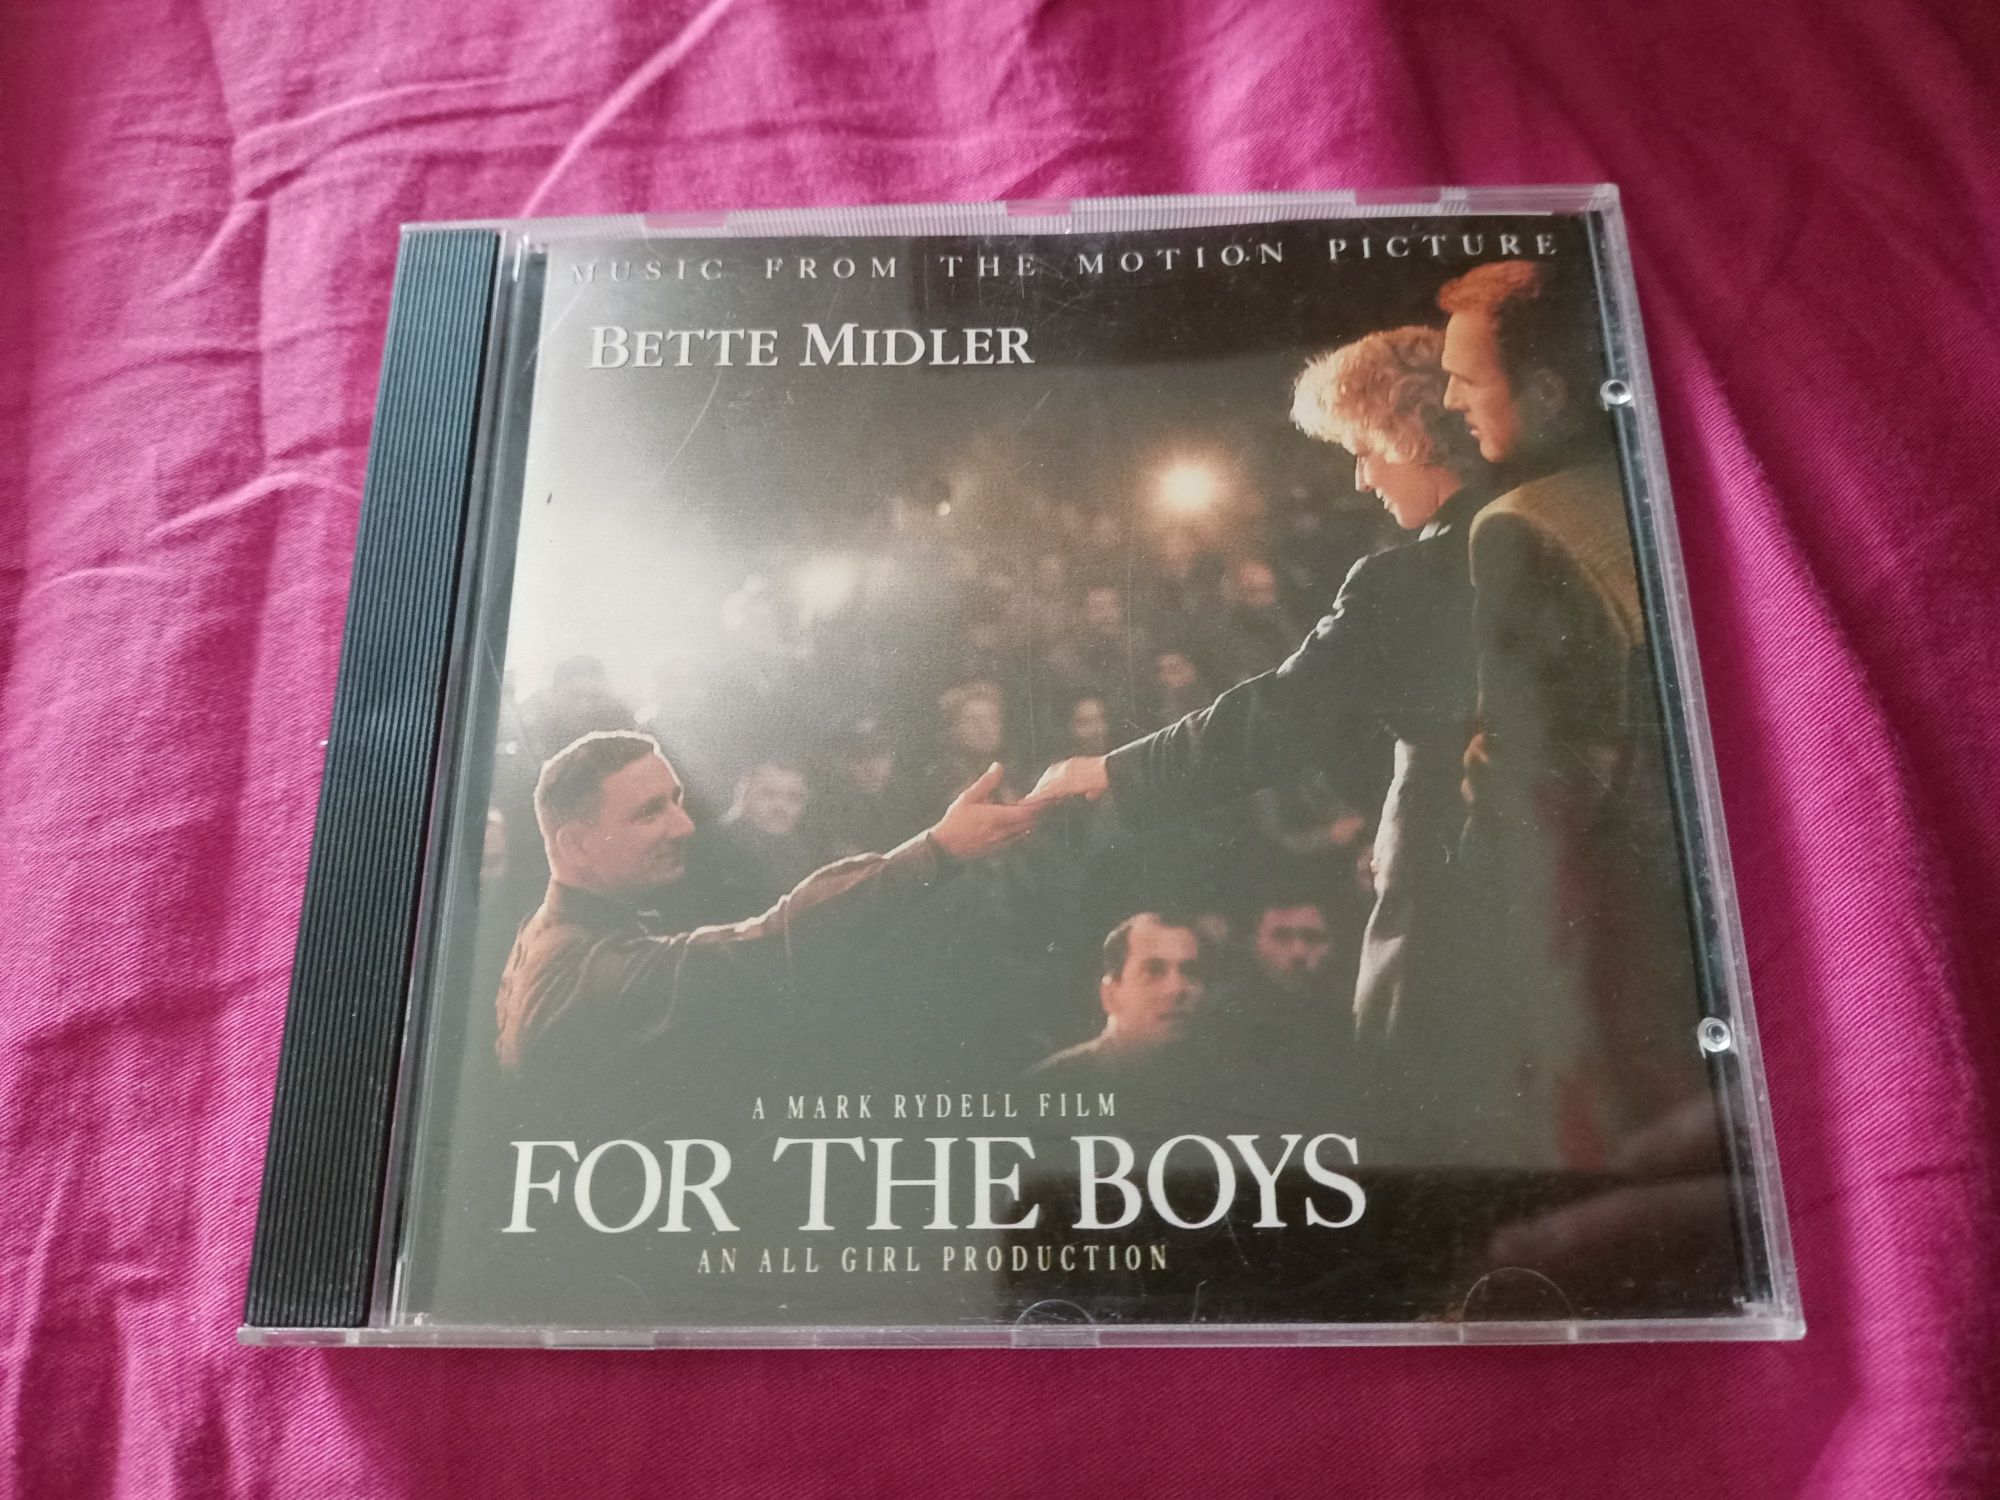 For The Boys - Bette Midler - Music From The Motion Picture (vg+)